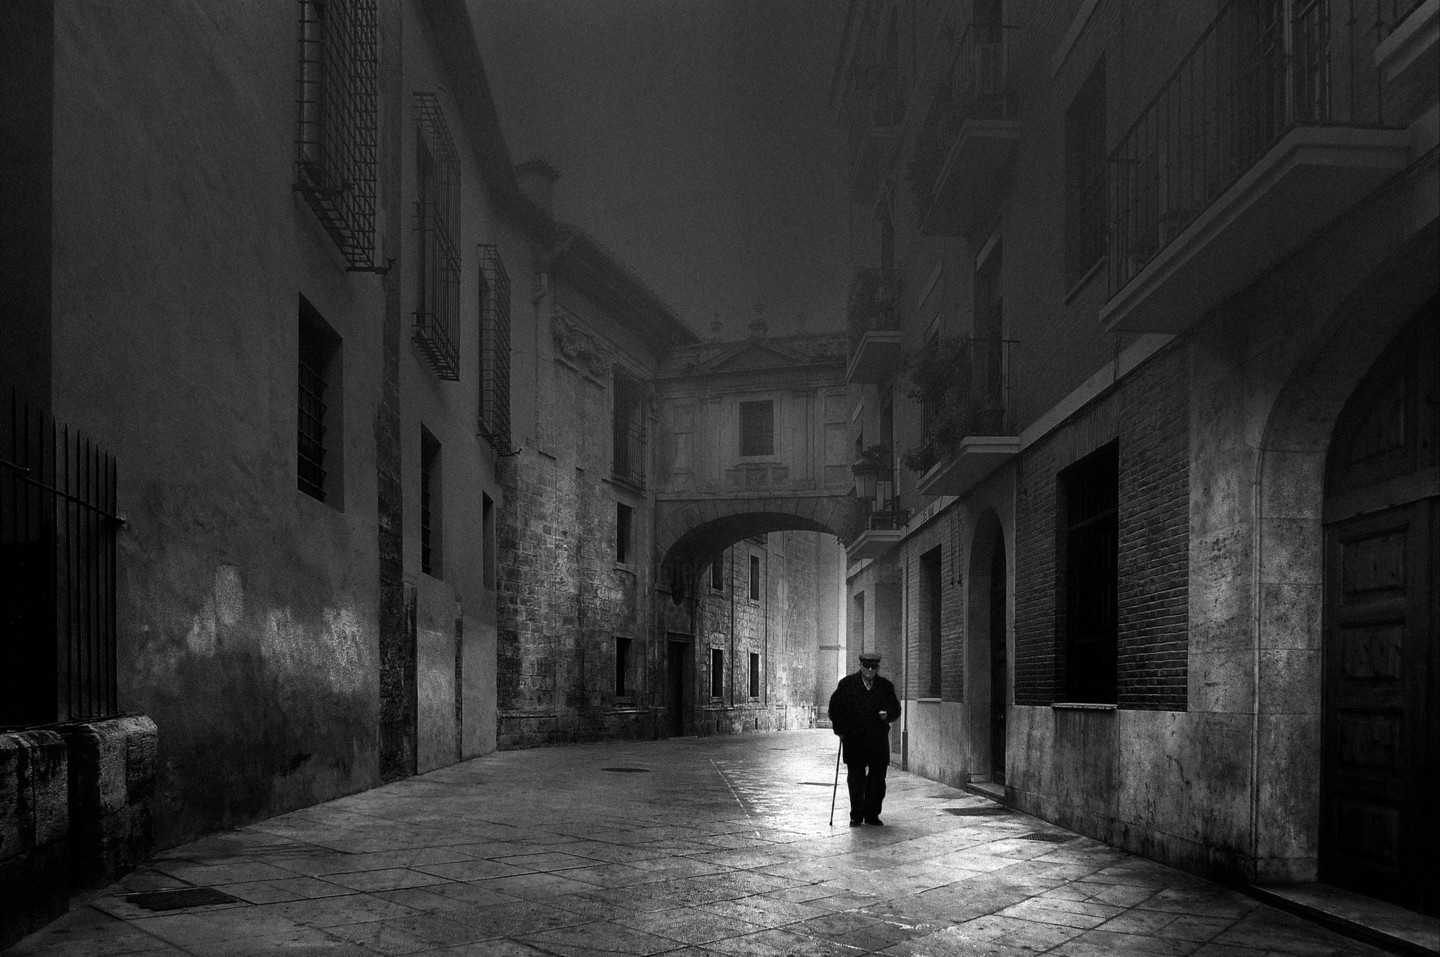 About Life The Passage Of Time Photography By Sol Marrades Artmajeur